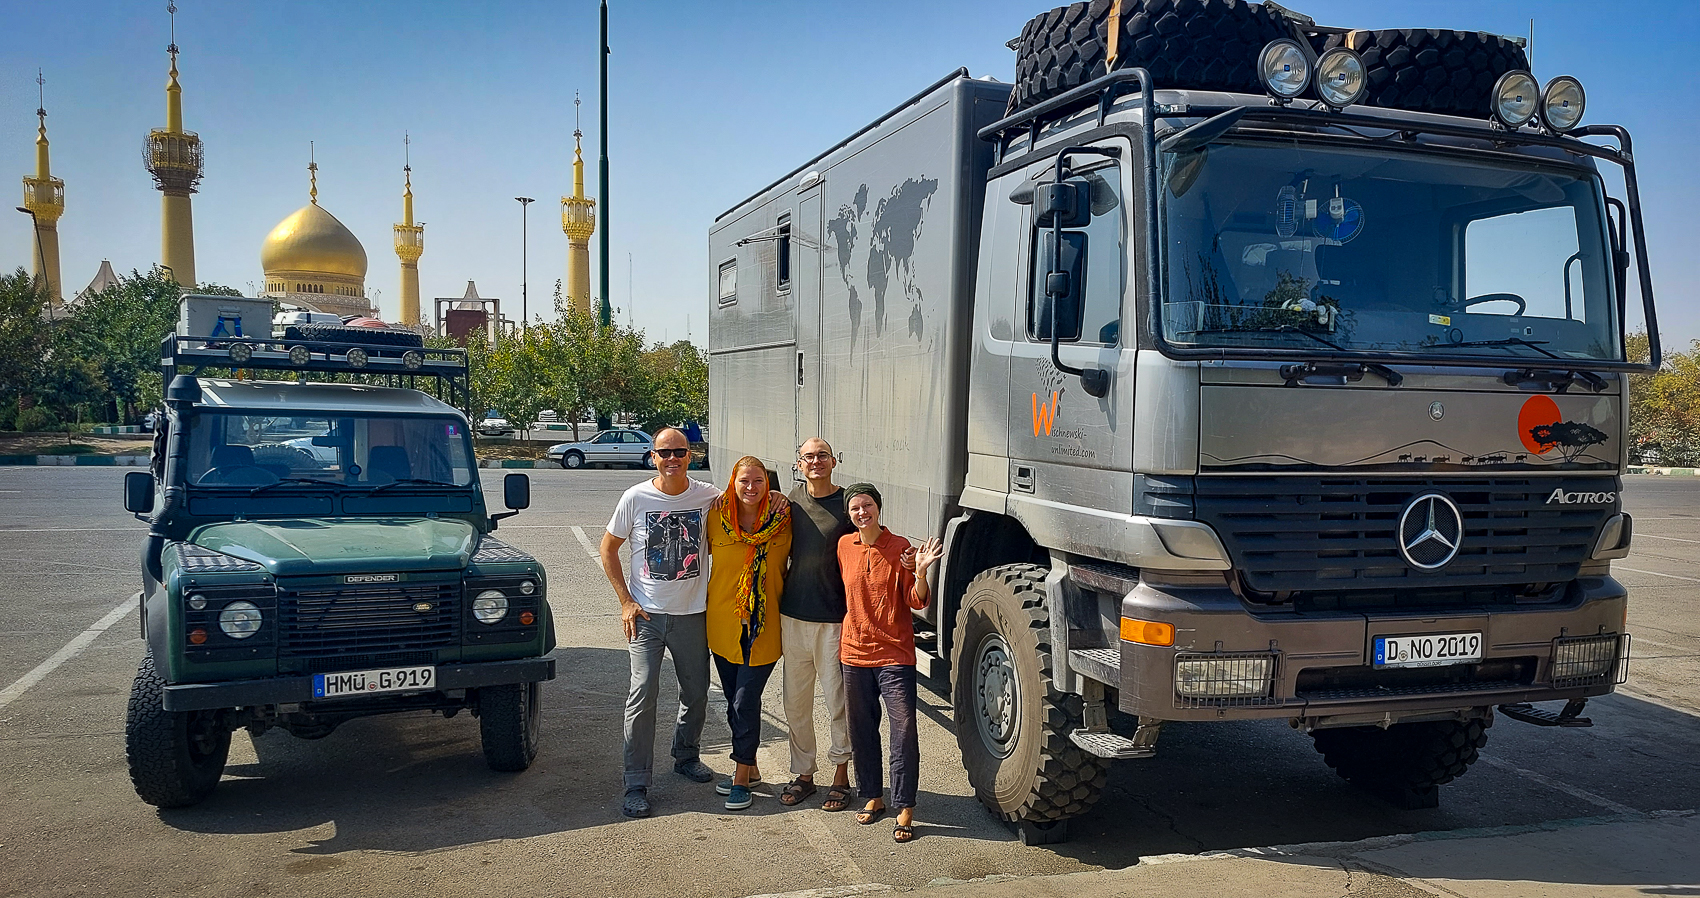 <span  class="uc_style_uc_tiles_grid_image_elementor_uc_items_attribute_title" style="color:#ffffff;">Friends from Germany visiting us in Teheran</span>